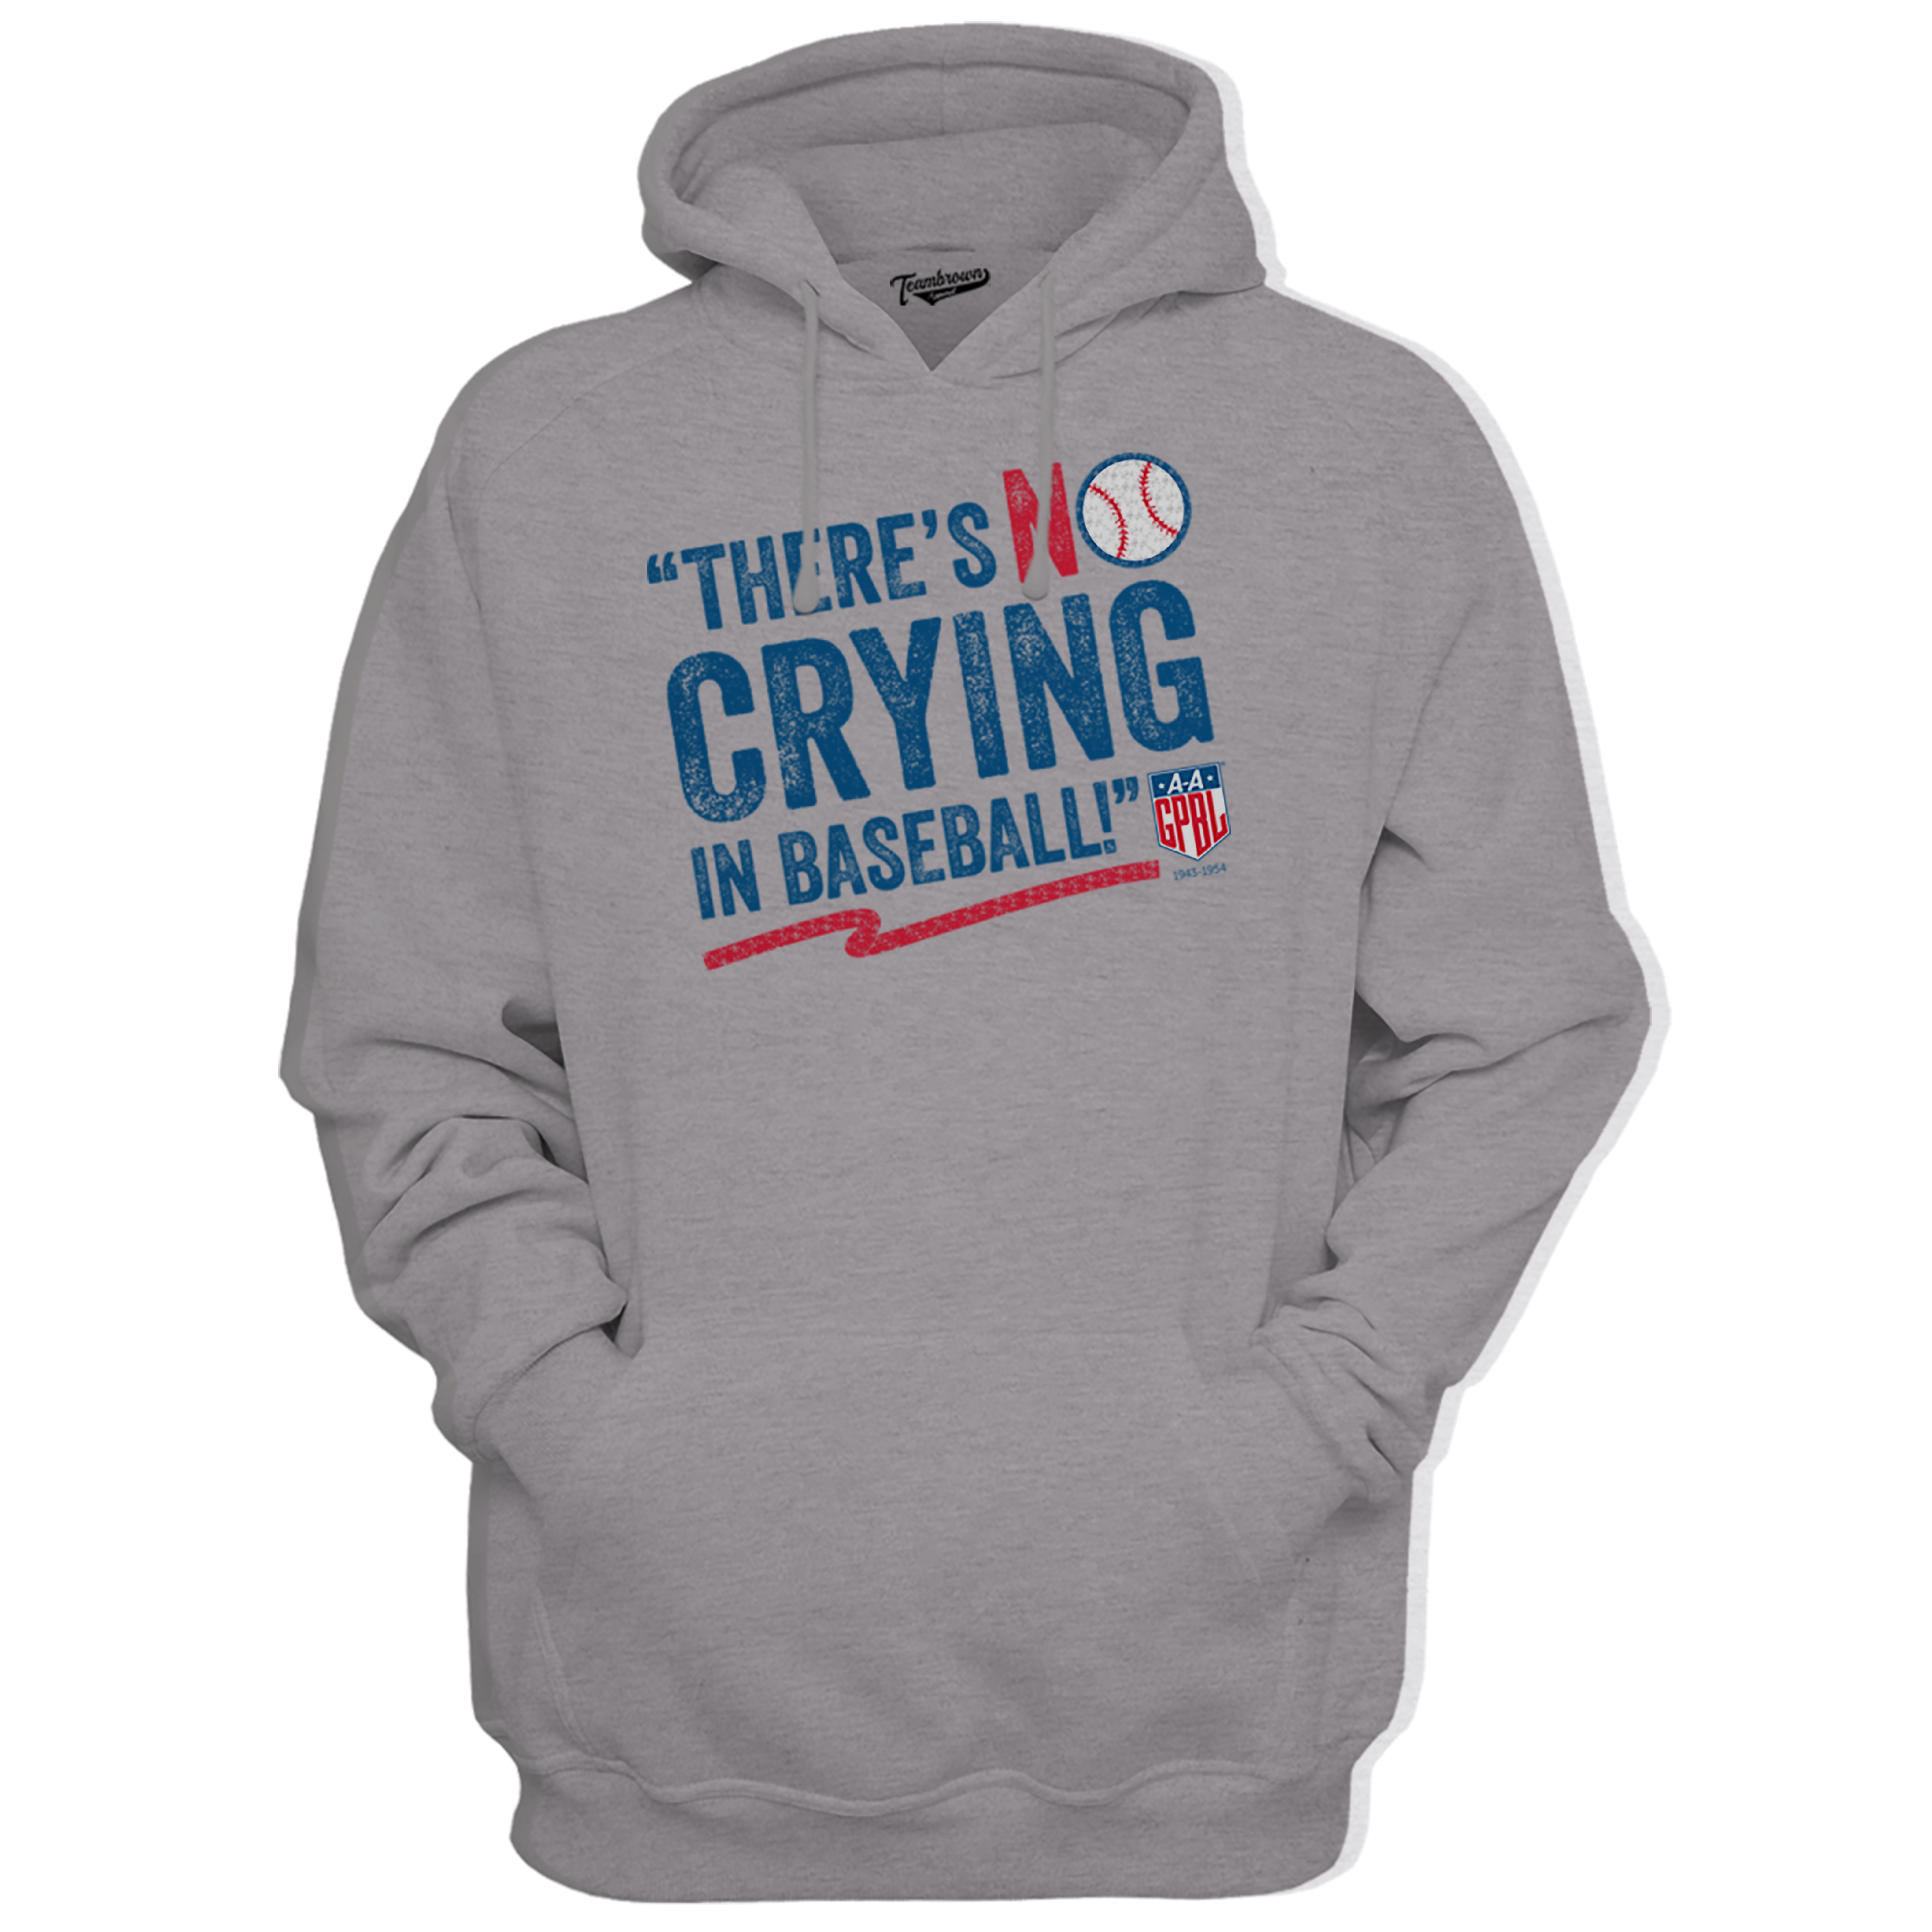 AAGPBL - No Crying In Baseball - Unisex Premium Hoodie | Officially Licensed - AAGPBL